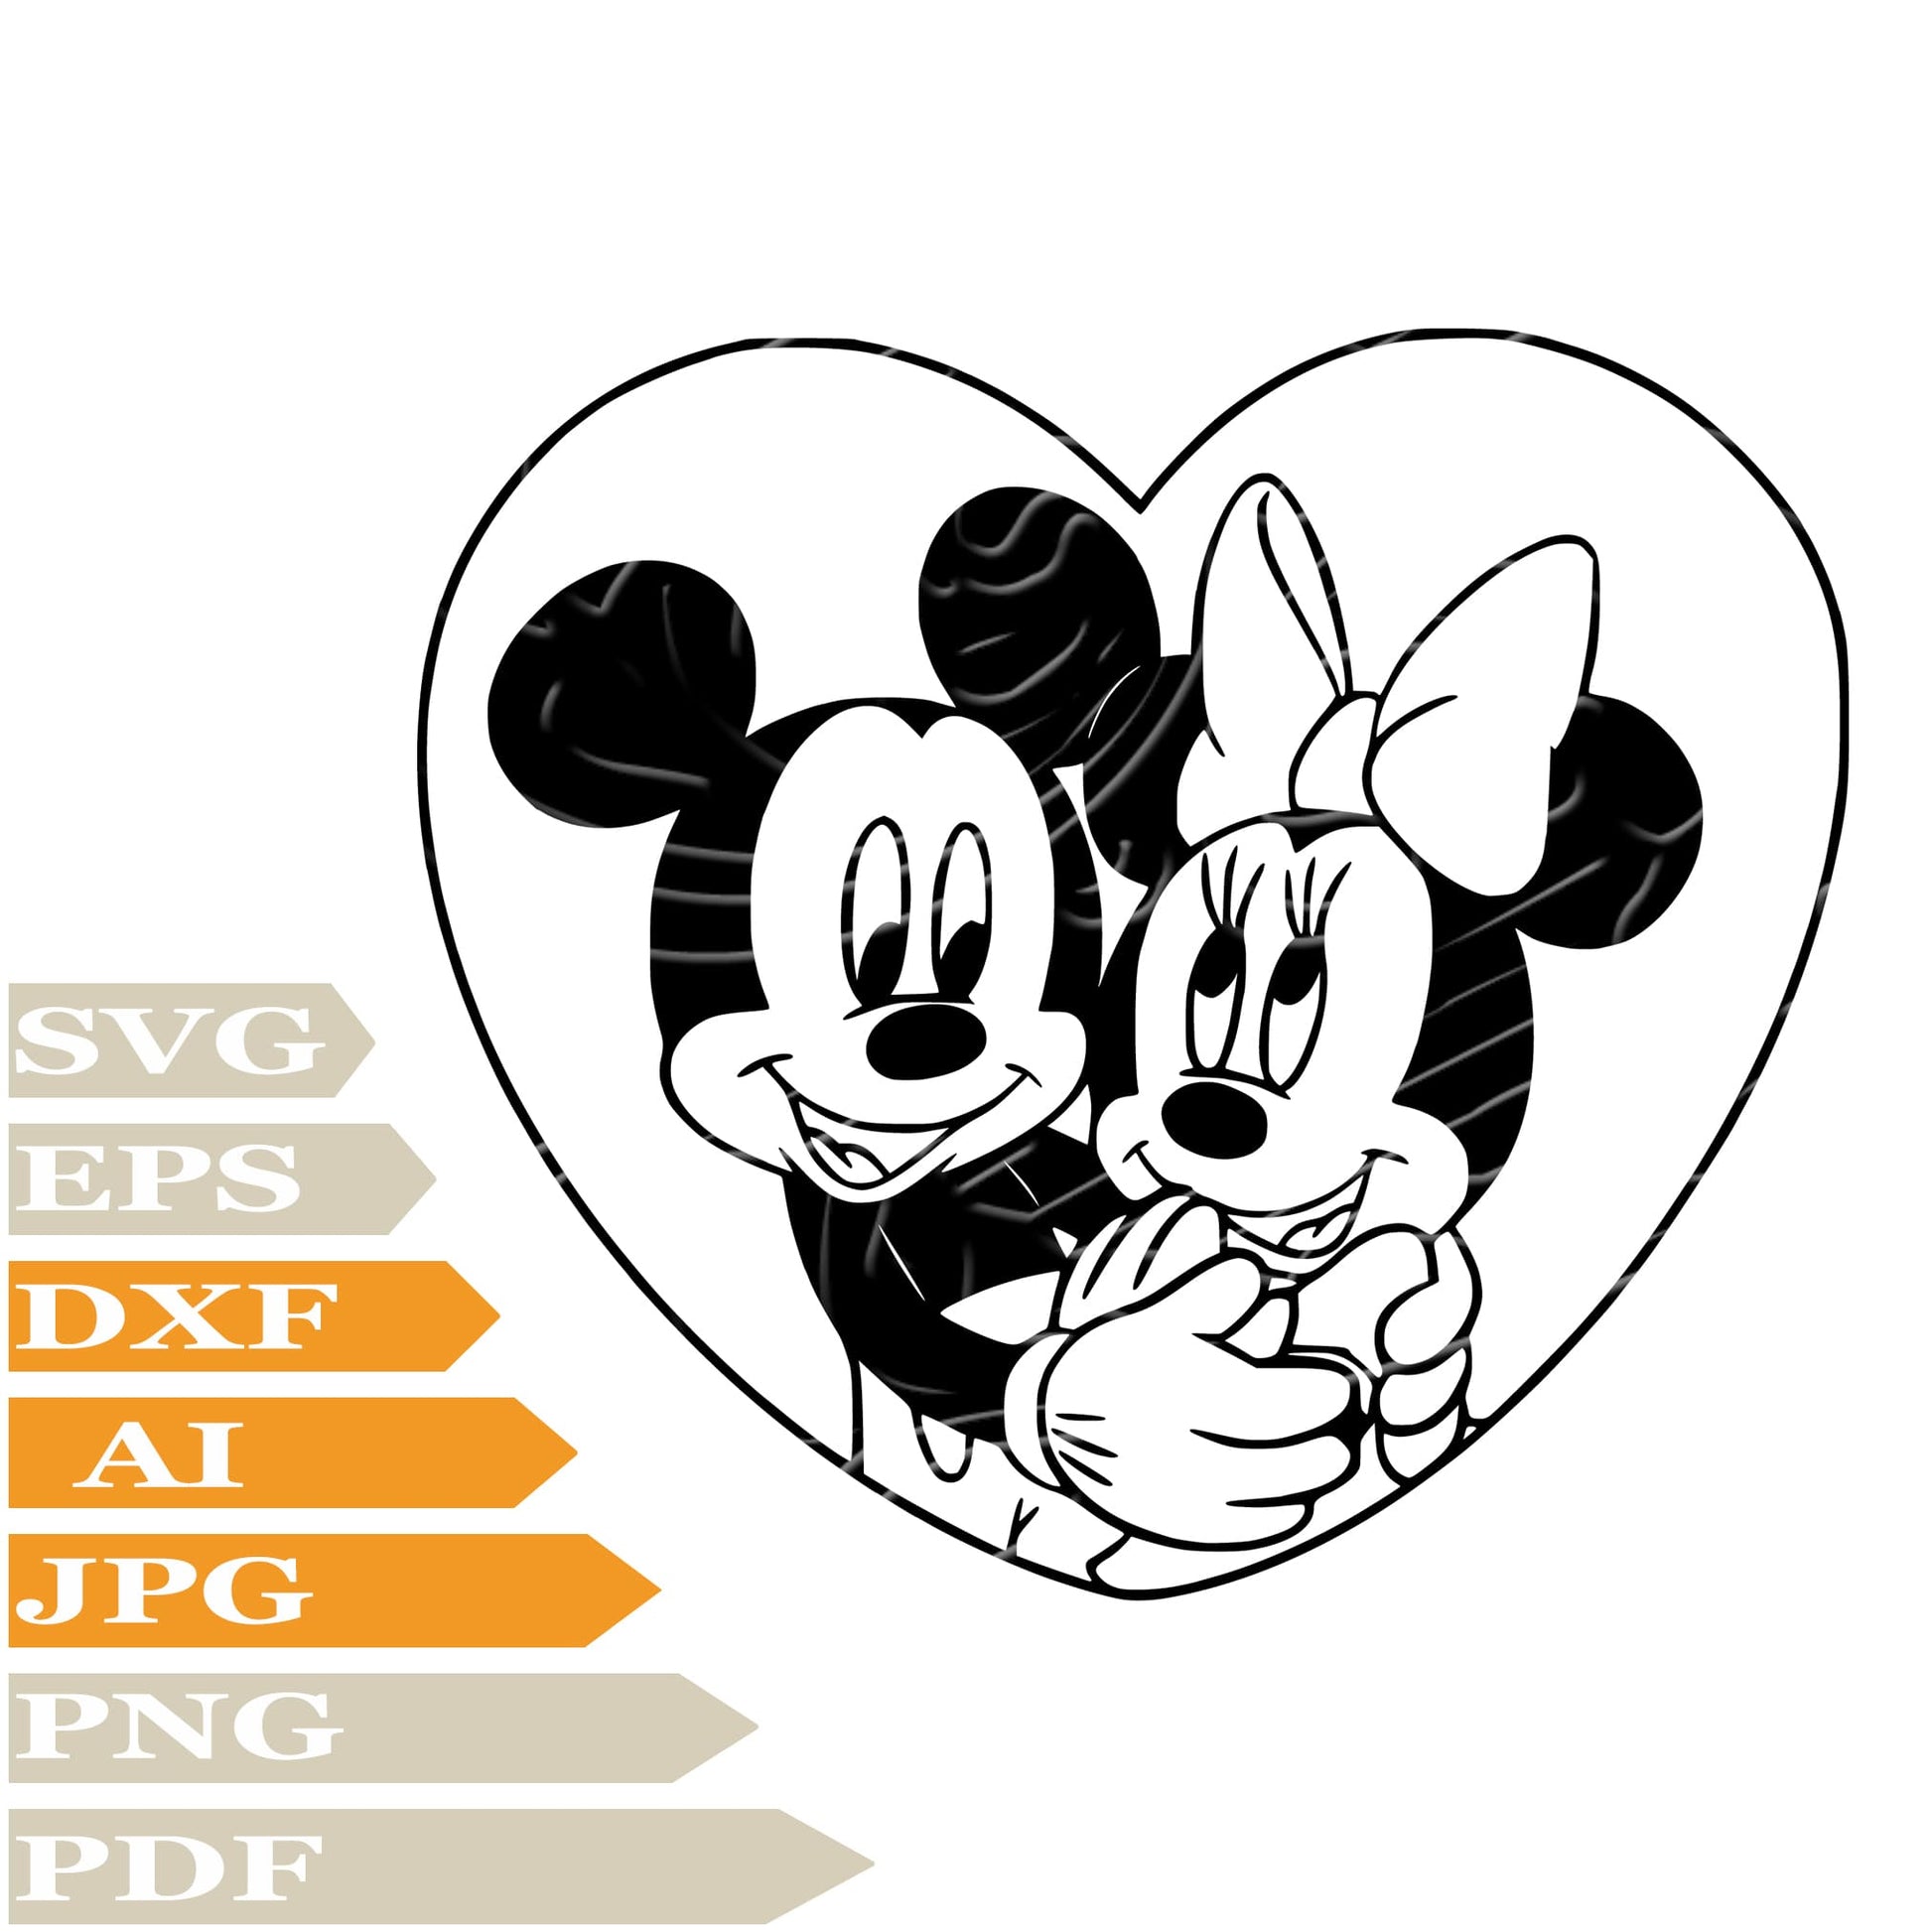 Mickey Minnie Mause, Miinnie Mickey Mause  In Heart Svg File, Image Cut, Png, For Tattoo, Silhouette, Digital Vector Download, Cut File, Clipart, For Cricut